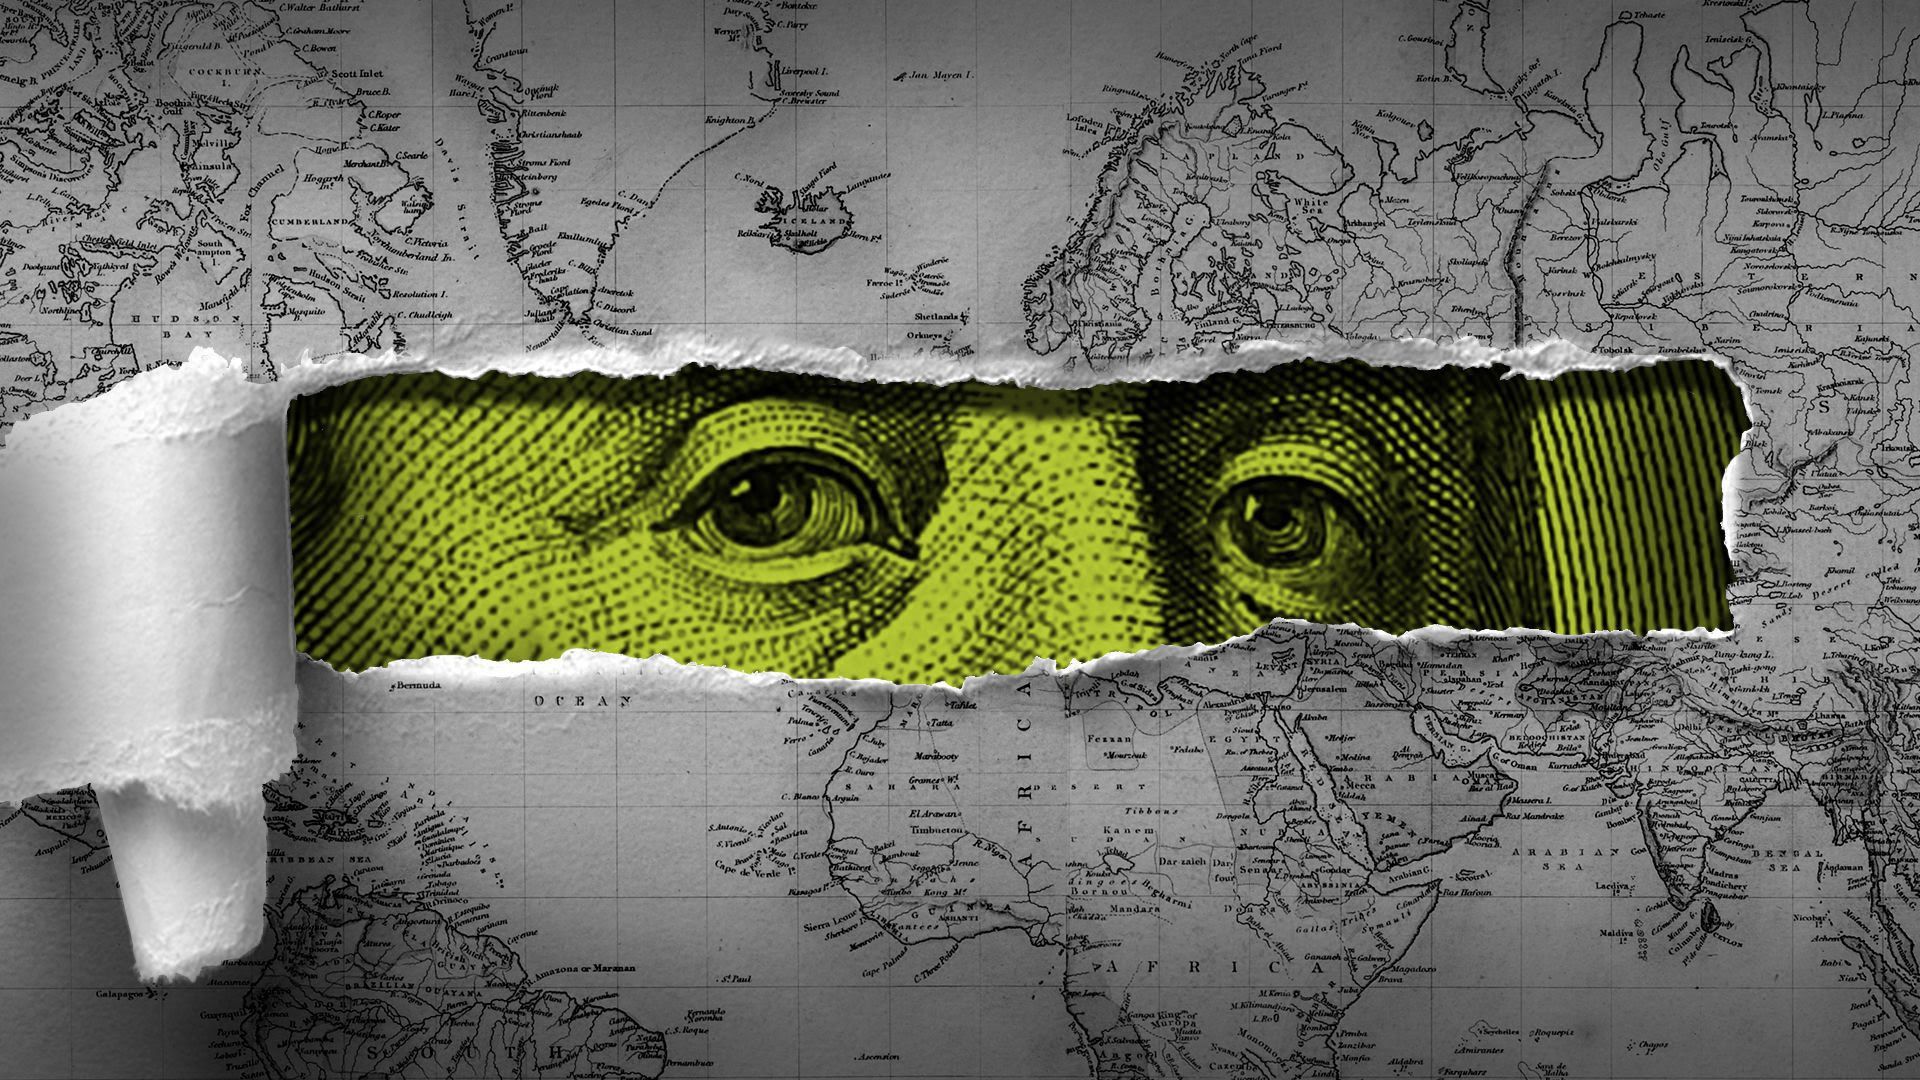 A map peeled back to reveal Ben Franklin's eyes from the dollar bill